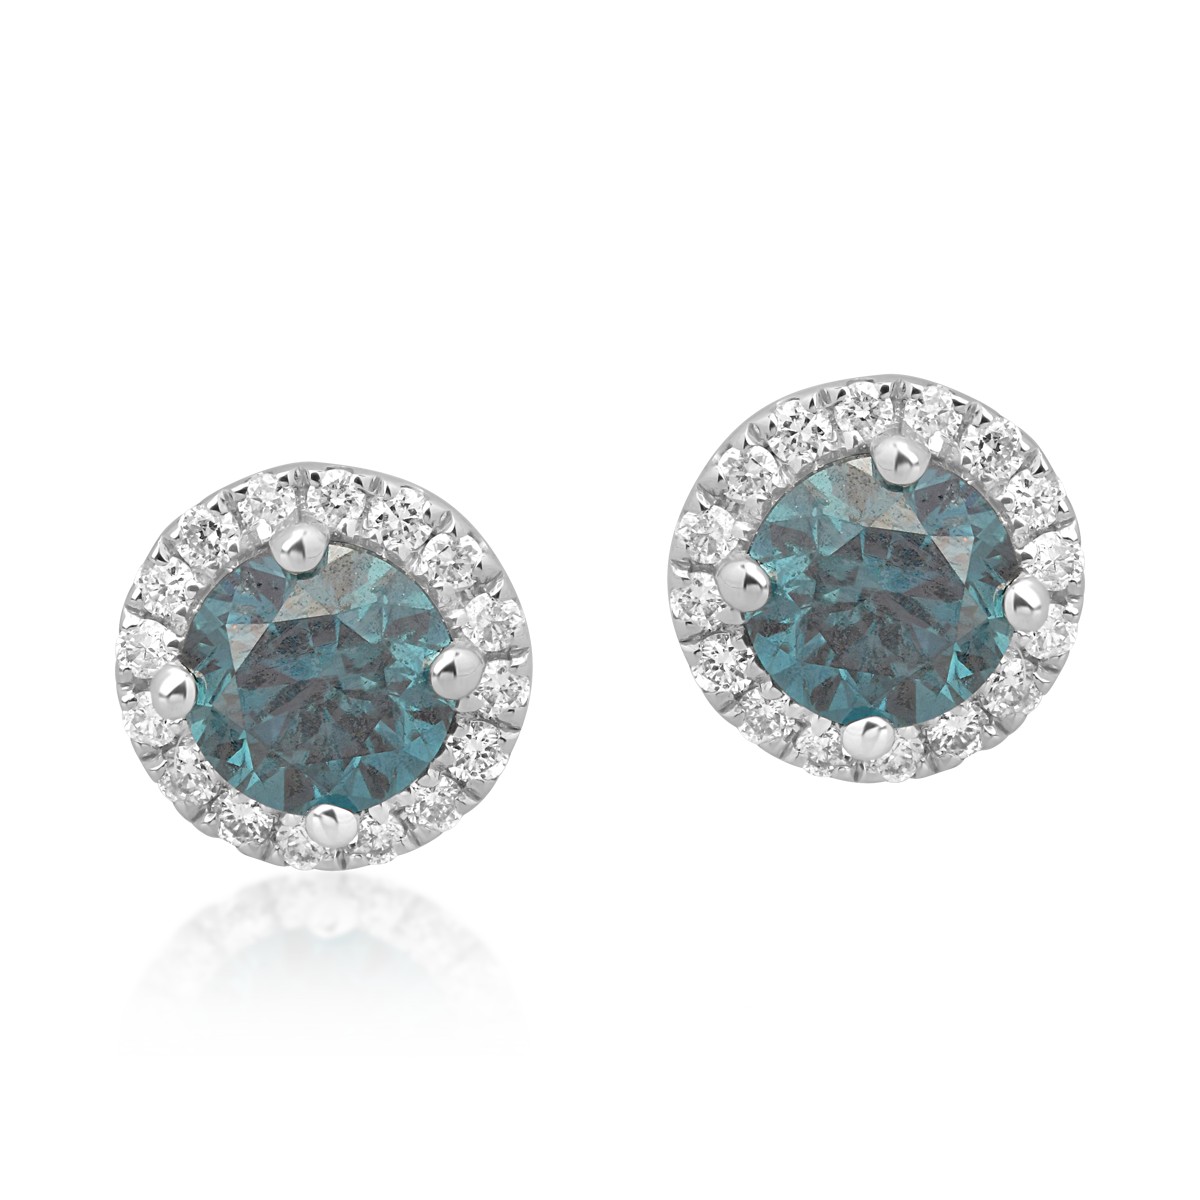 18K white gold earrings with 0.61ct blue diamonds and 0.1ct diamonds